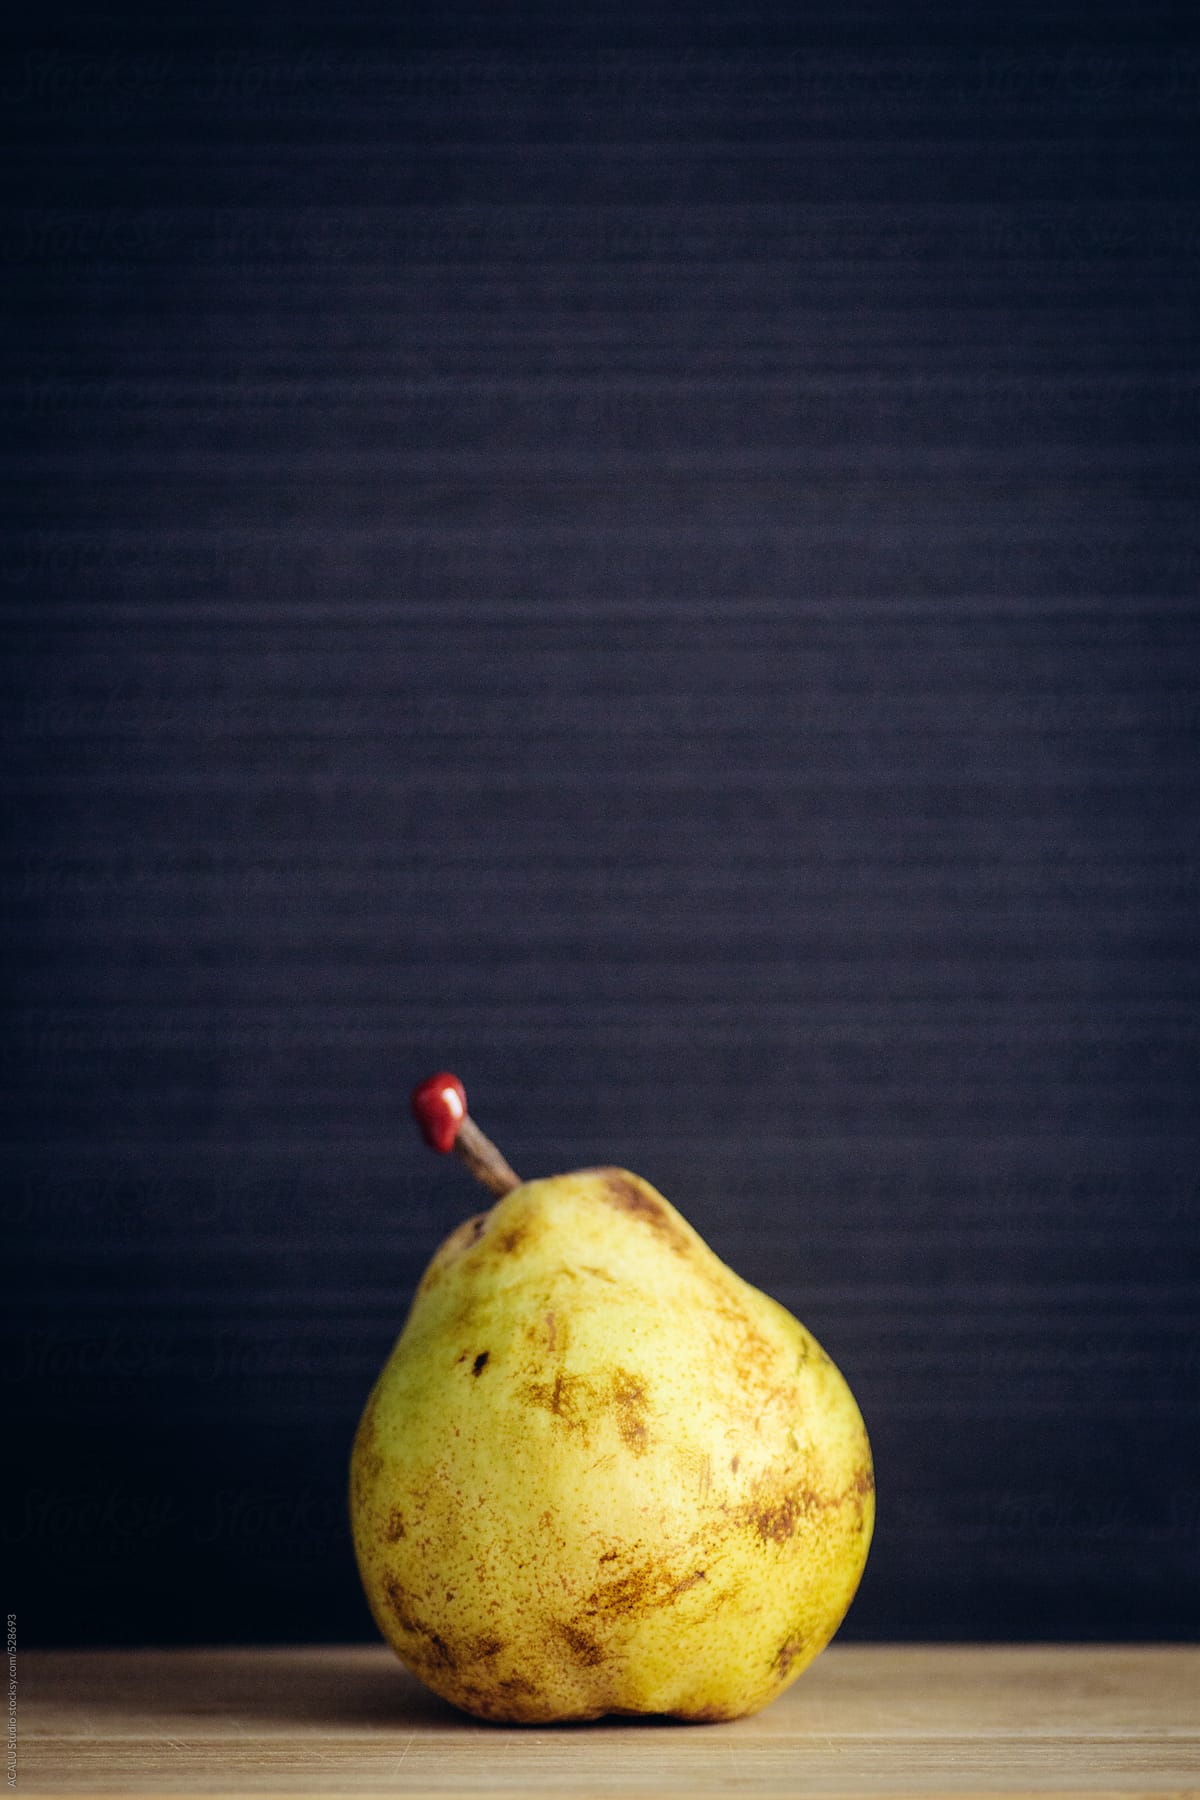 Yellow pear with red seal on black background